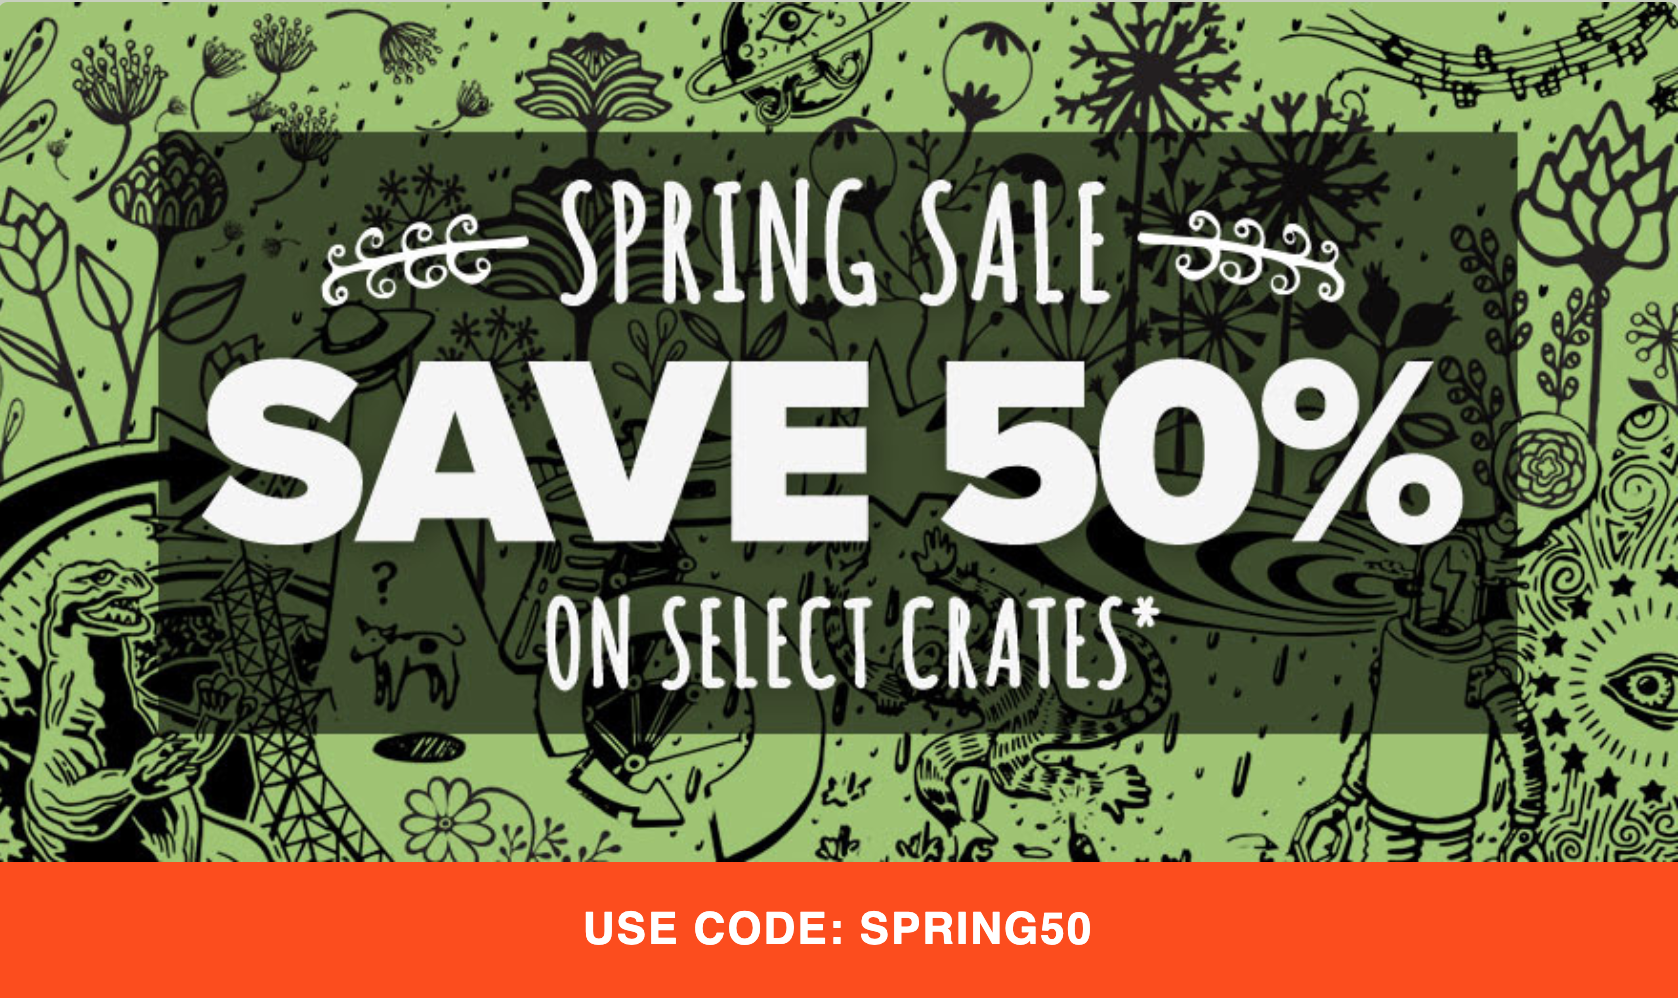 Extended! Loot Crate Sale – 50% Off Select Crates!